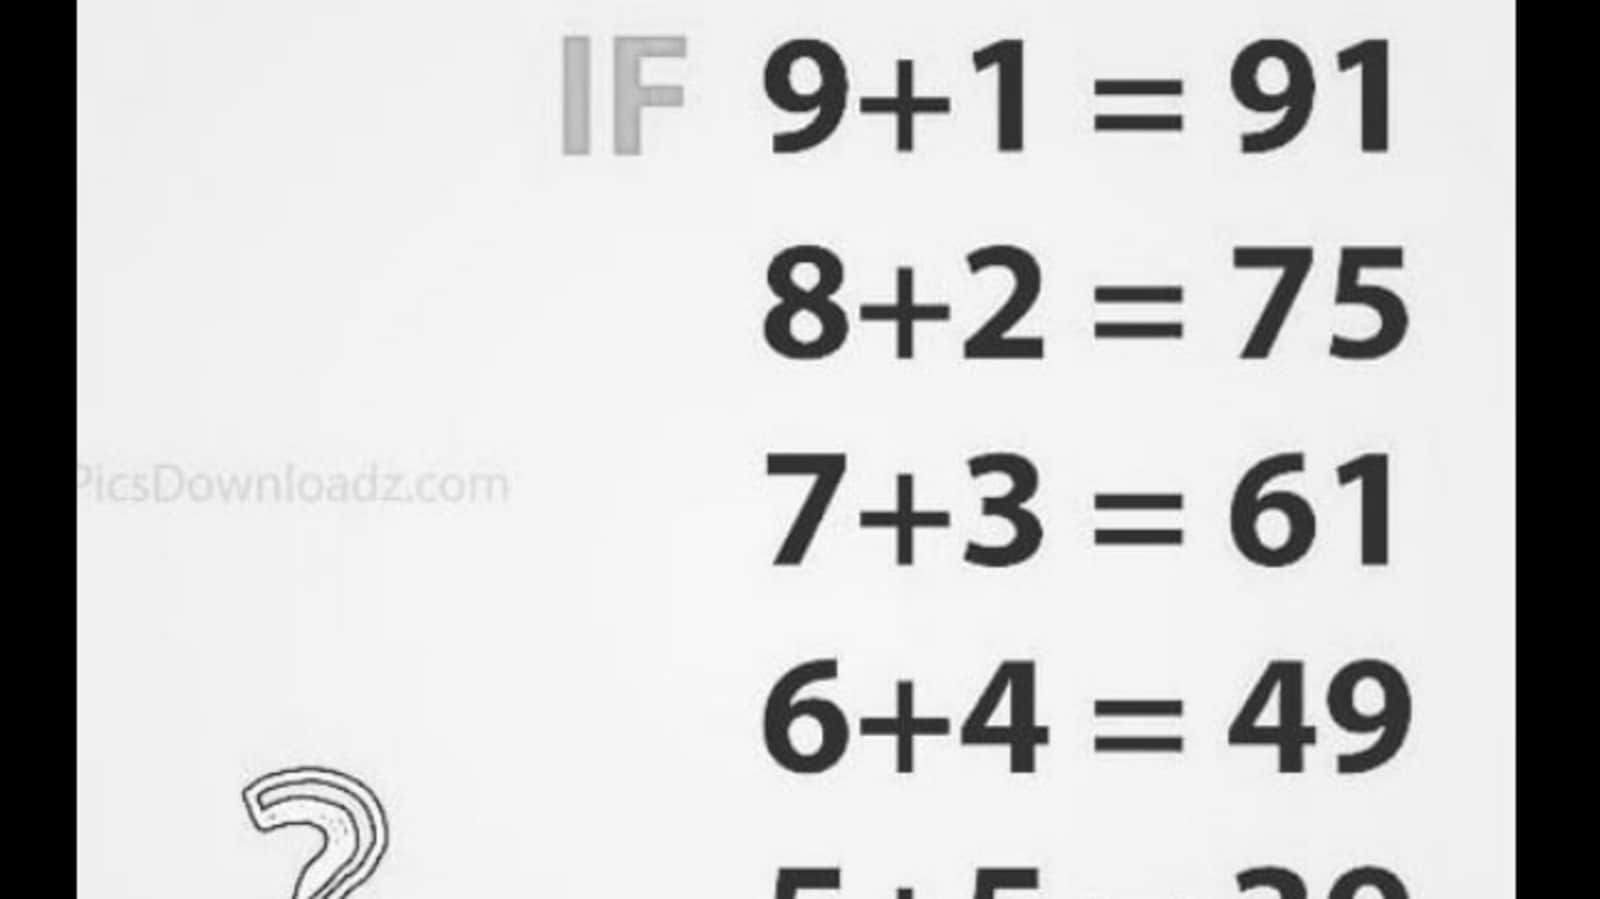 Think you are good at maths? This brain teaser will test your skills